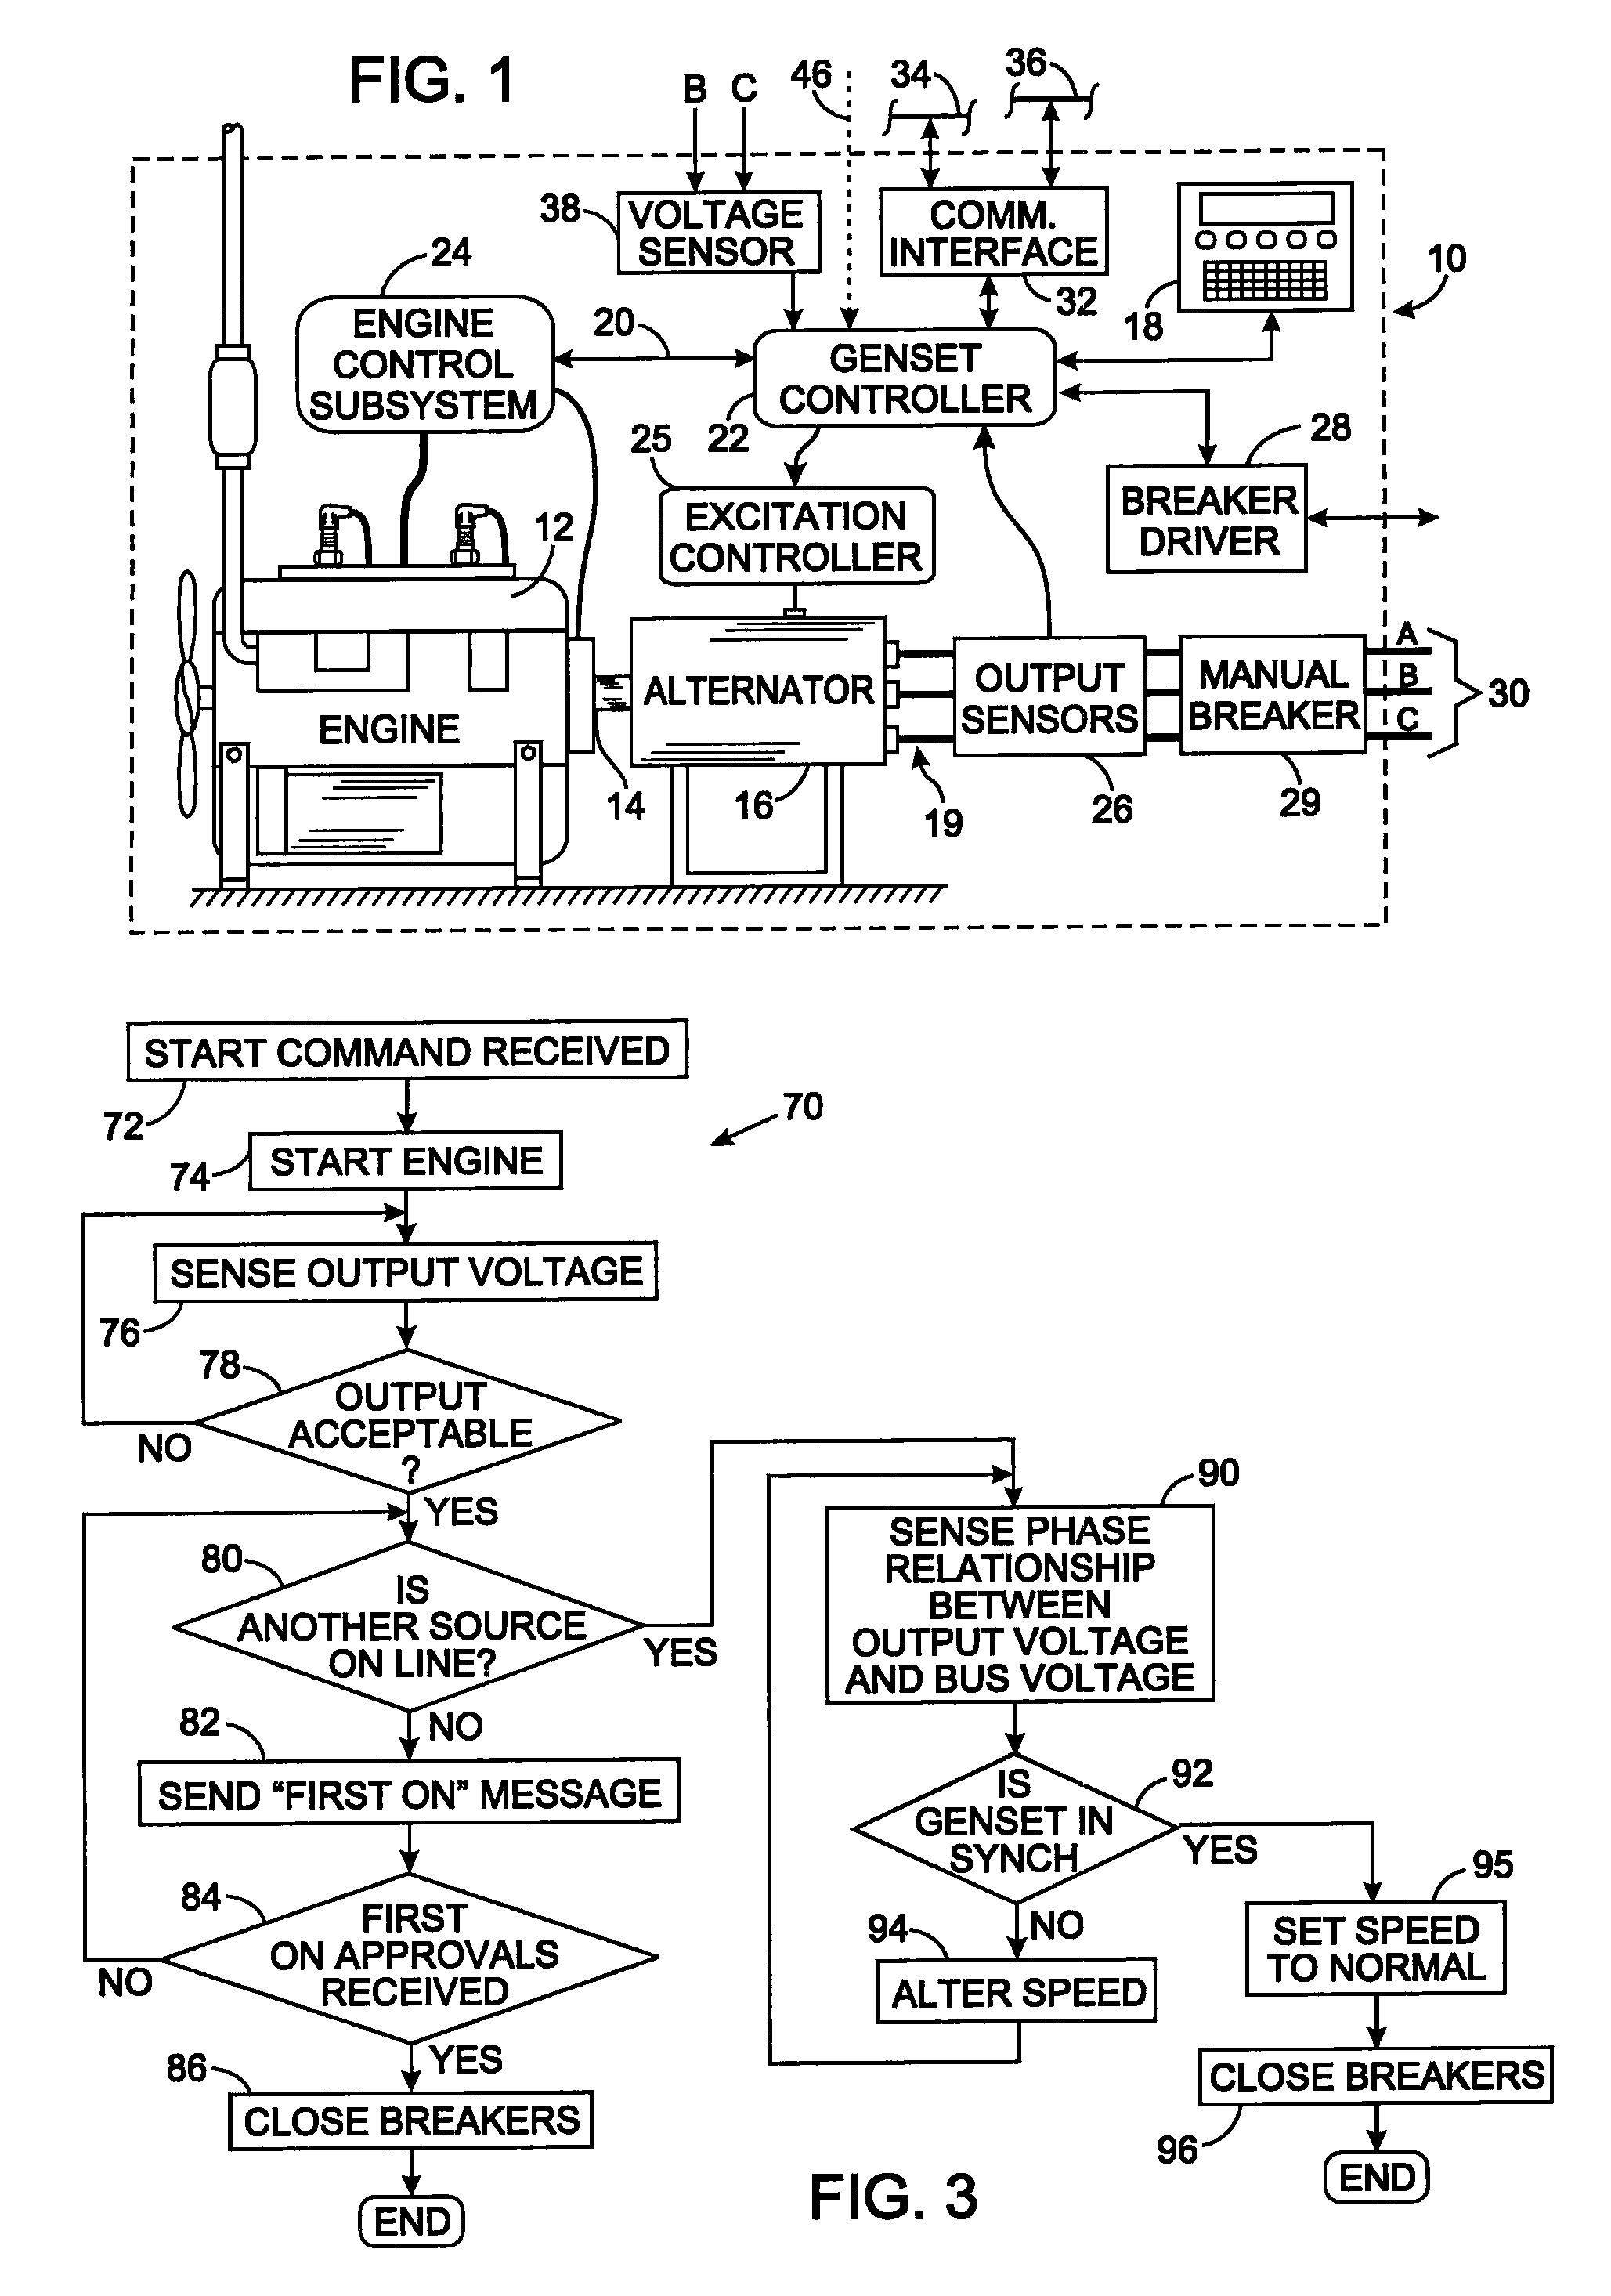 System and method for paralleling electrical power generators